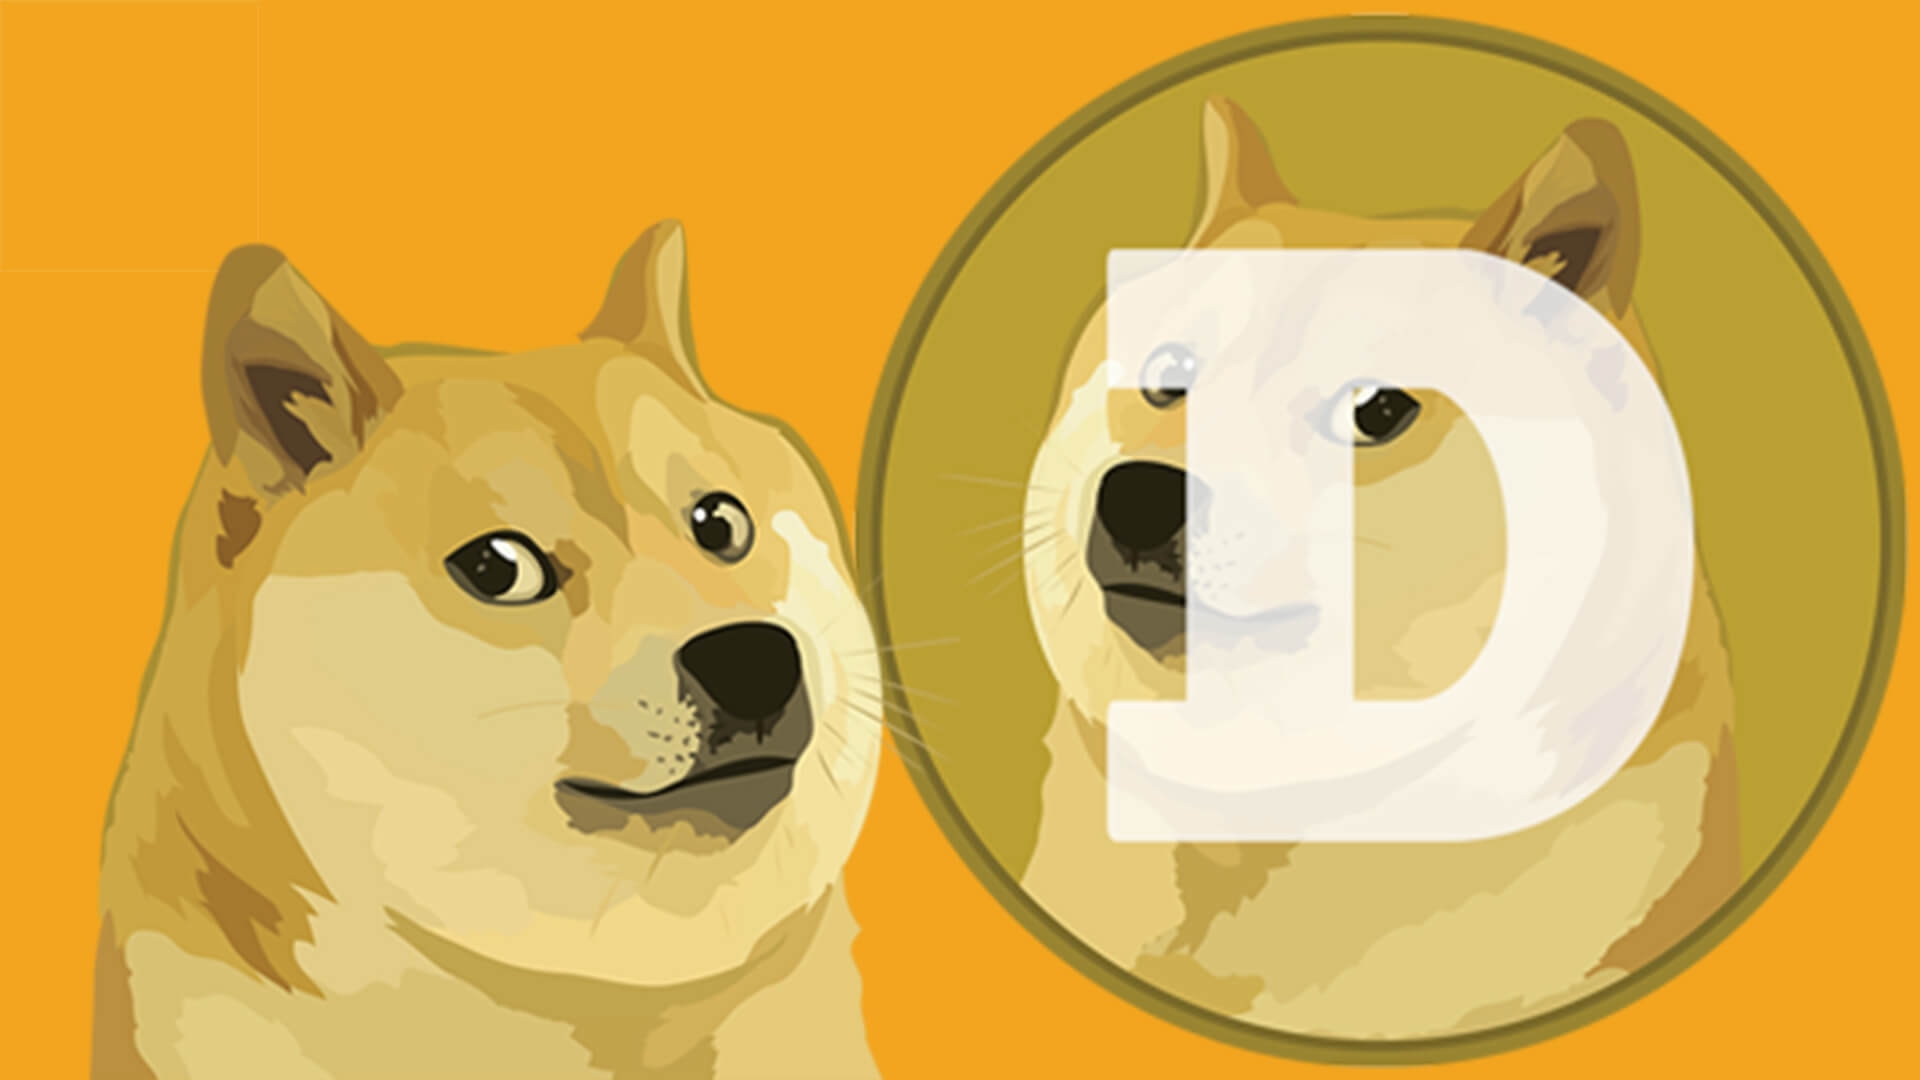 Complete guide about Dogecoin